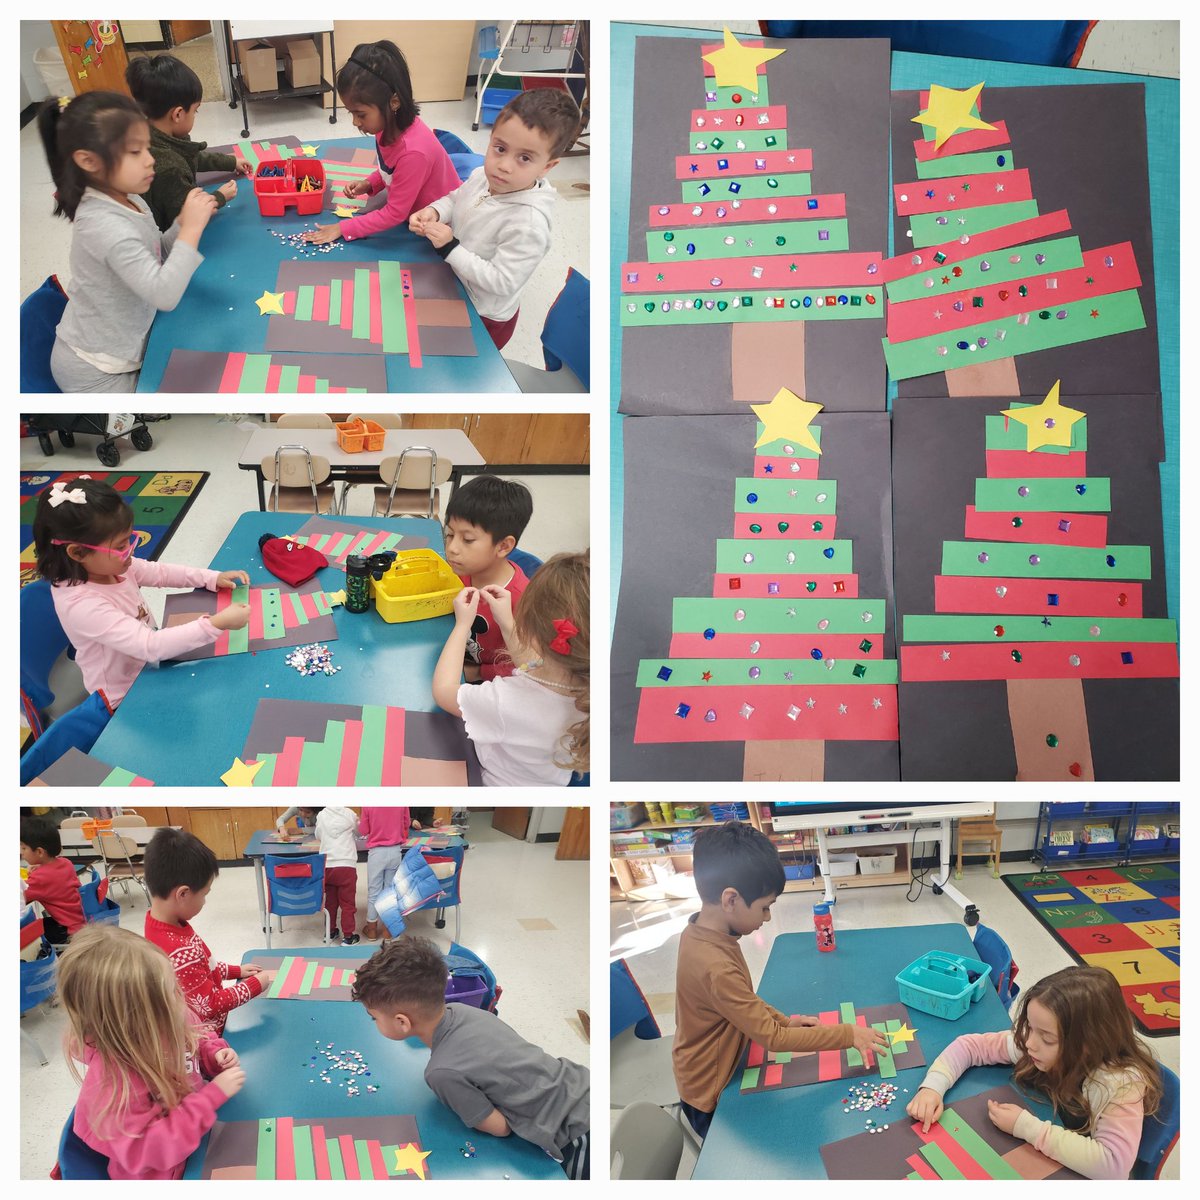 This month we discussed how Kwanzaa, Hanukkah, and Christmas celebrations involve light, food, gifts, and friends & family. @JJESOwls